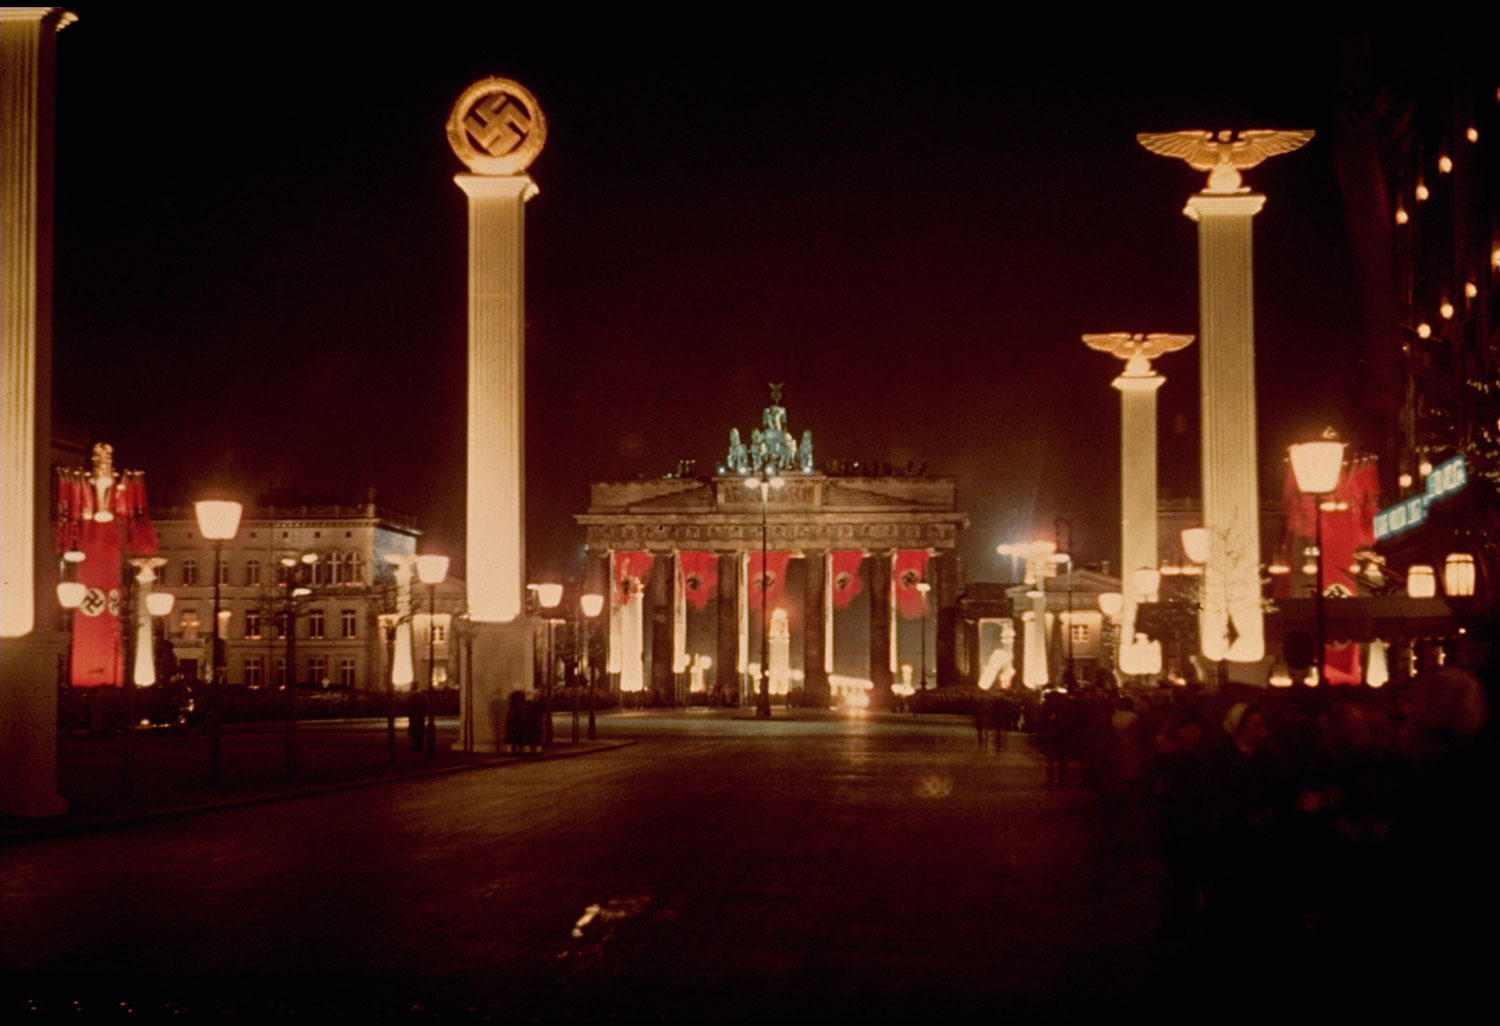 Berlin's Brandenburg gate and colonnades are lit up at night in honor of Adolf Hitler's 50th birthday, April 20, 1939.